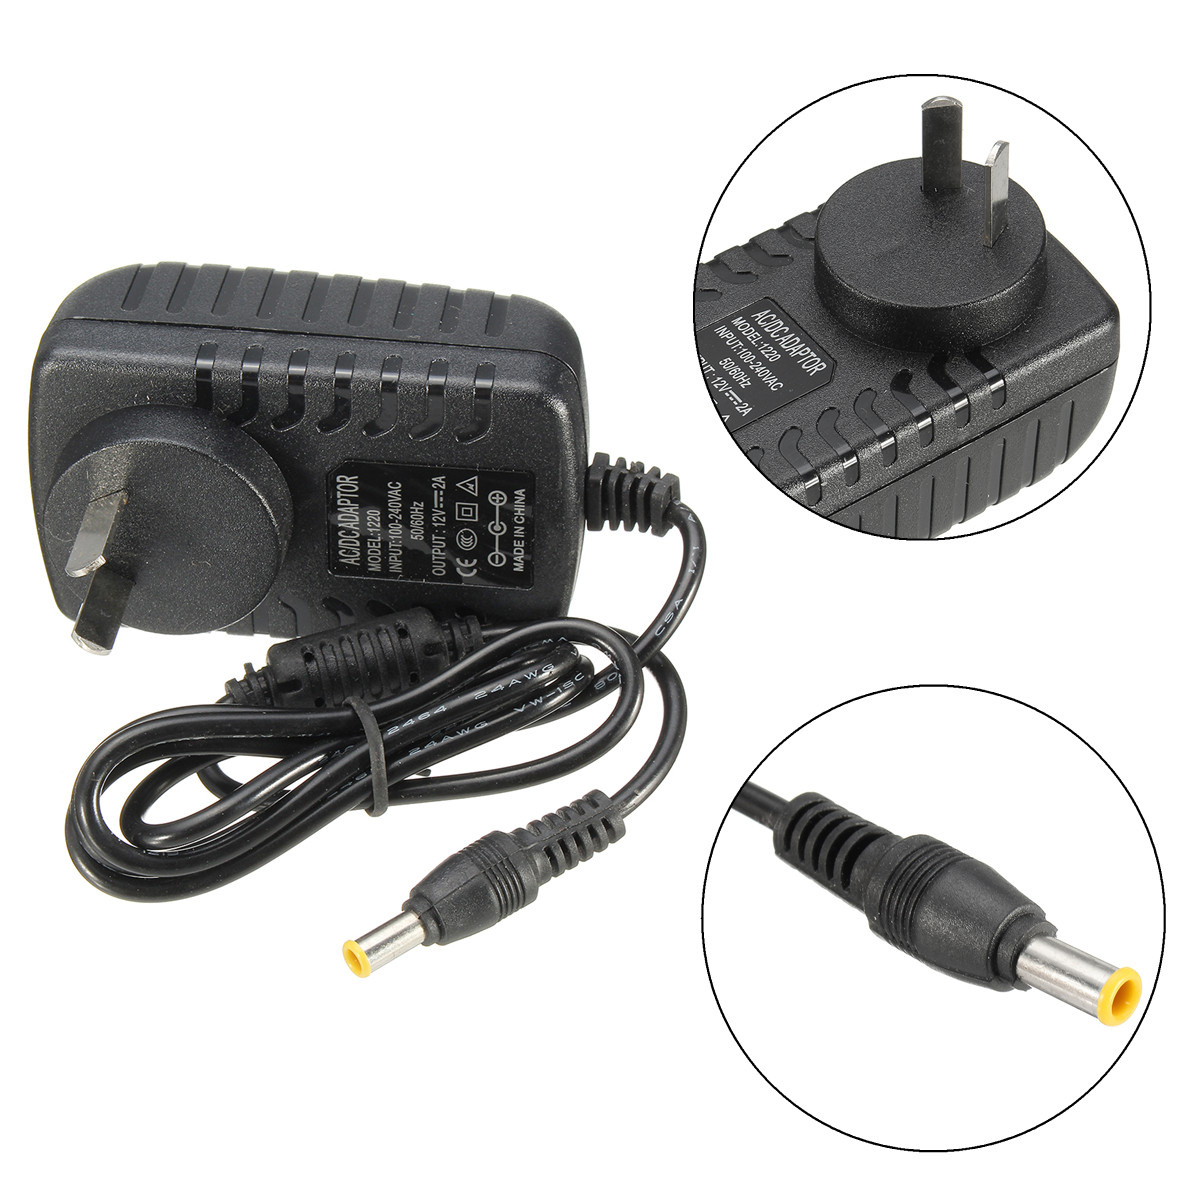 12V-2A-Adapter-for-Makita-BMR100-BMR101-JobSite-Radio-Switching-Power-Supply-Cord-Wall-Plug-Charger-1363818-1